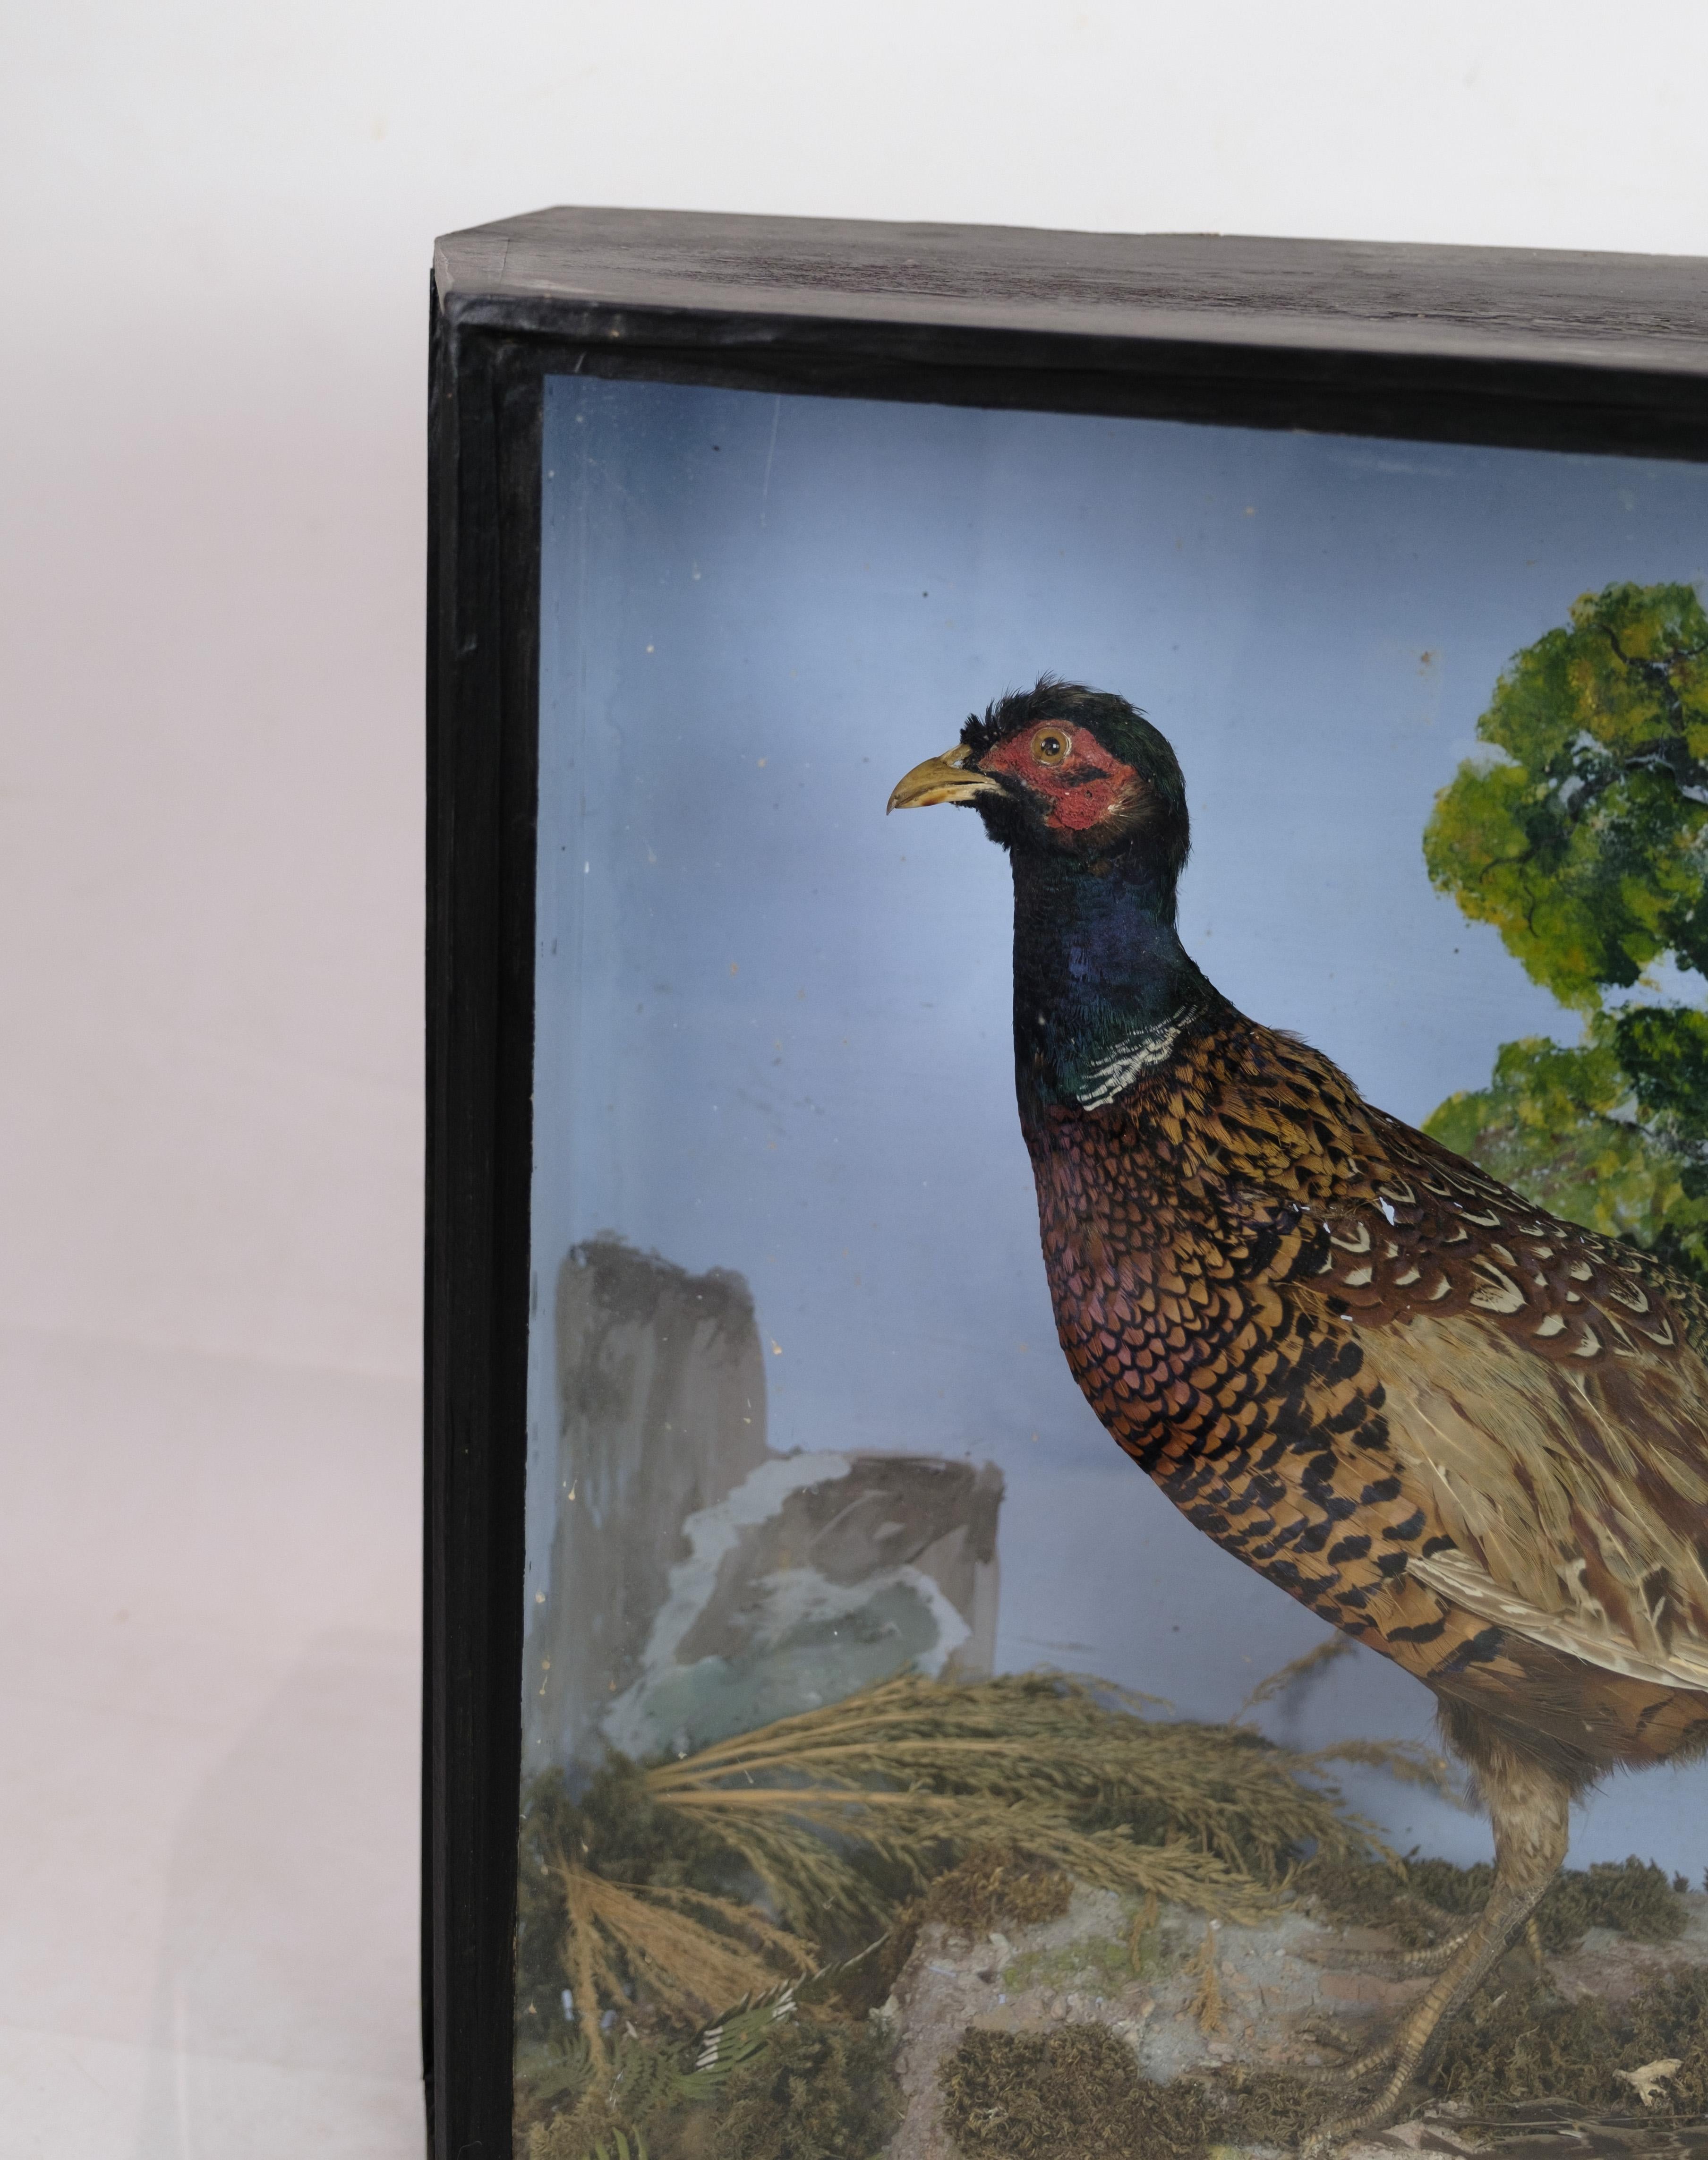 Mid-Century Modern Display cabinet With A Pair Of Pheasants From 1960s For Sale